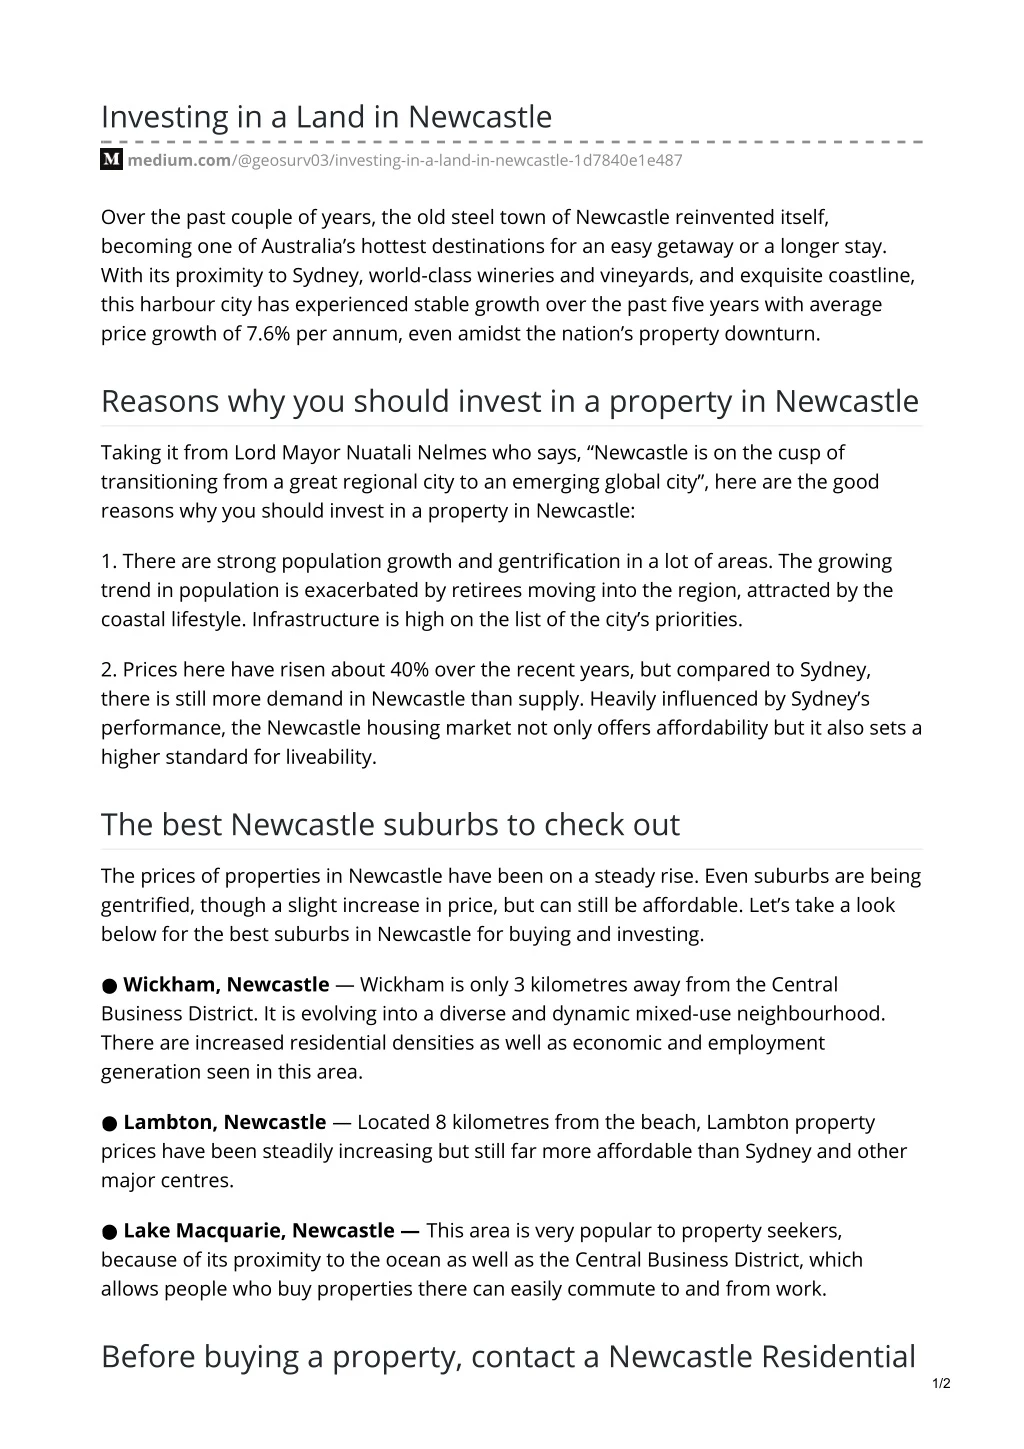 investing in a land in newcastle